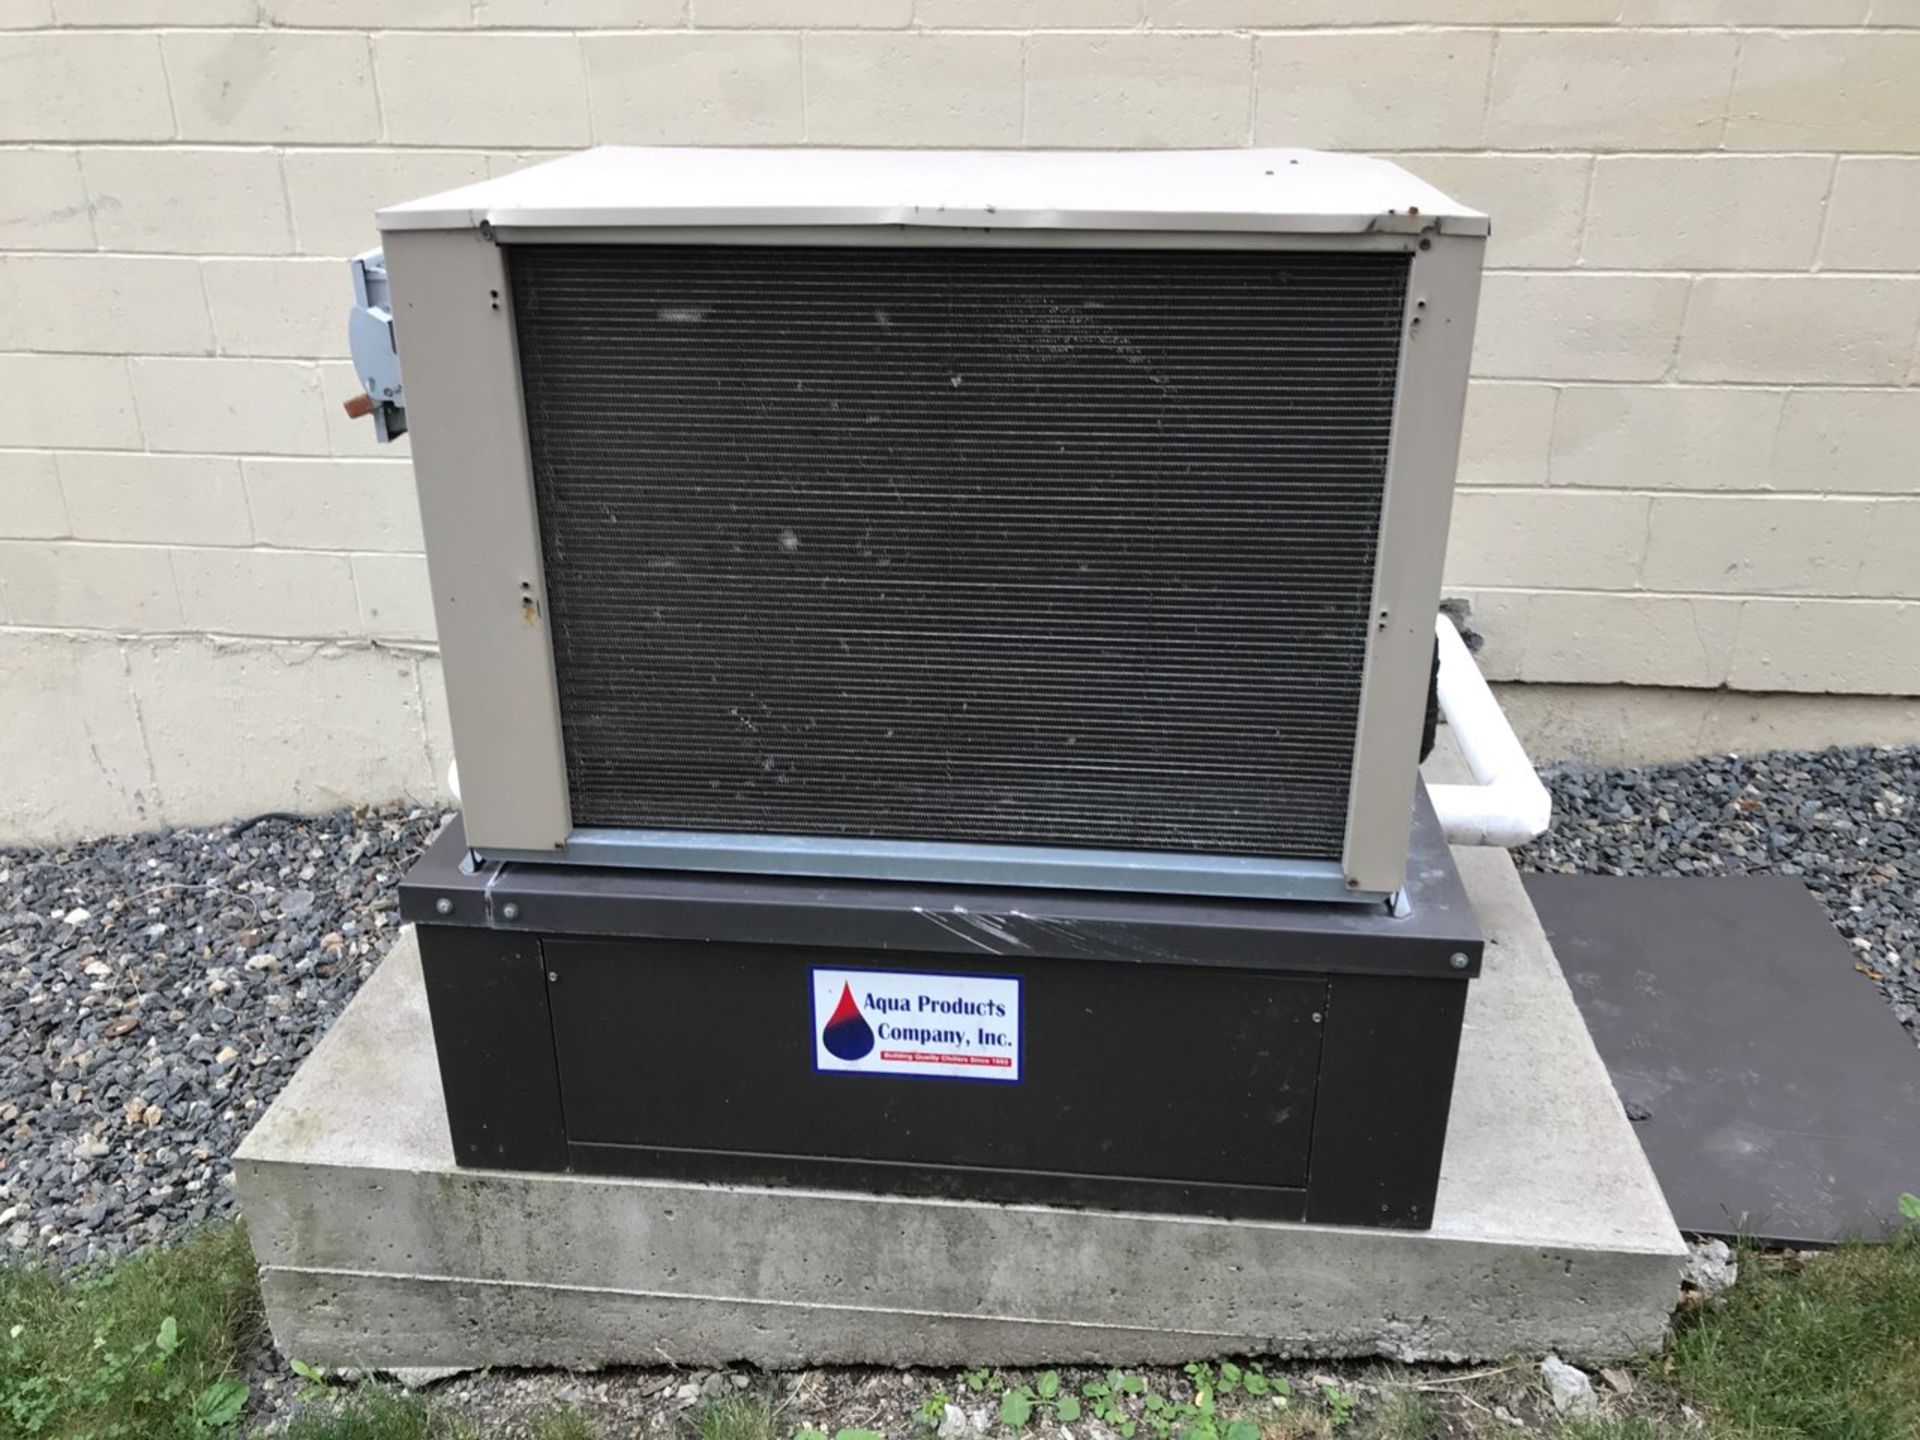 Aqua Products Company #DCS-060B-S41 Chiller, 3 Phase, 208-230V, S/N: 009011106001 See Description - Image 2 of 3